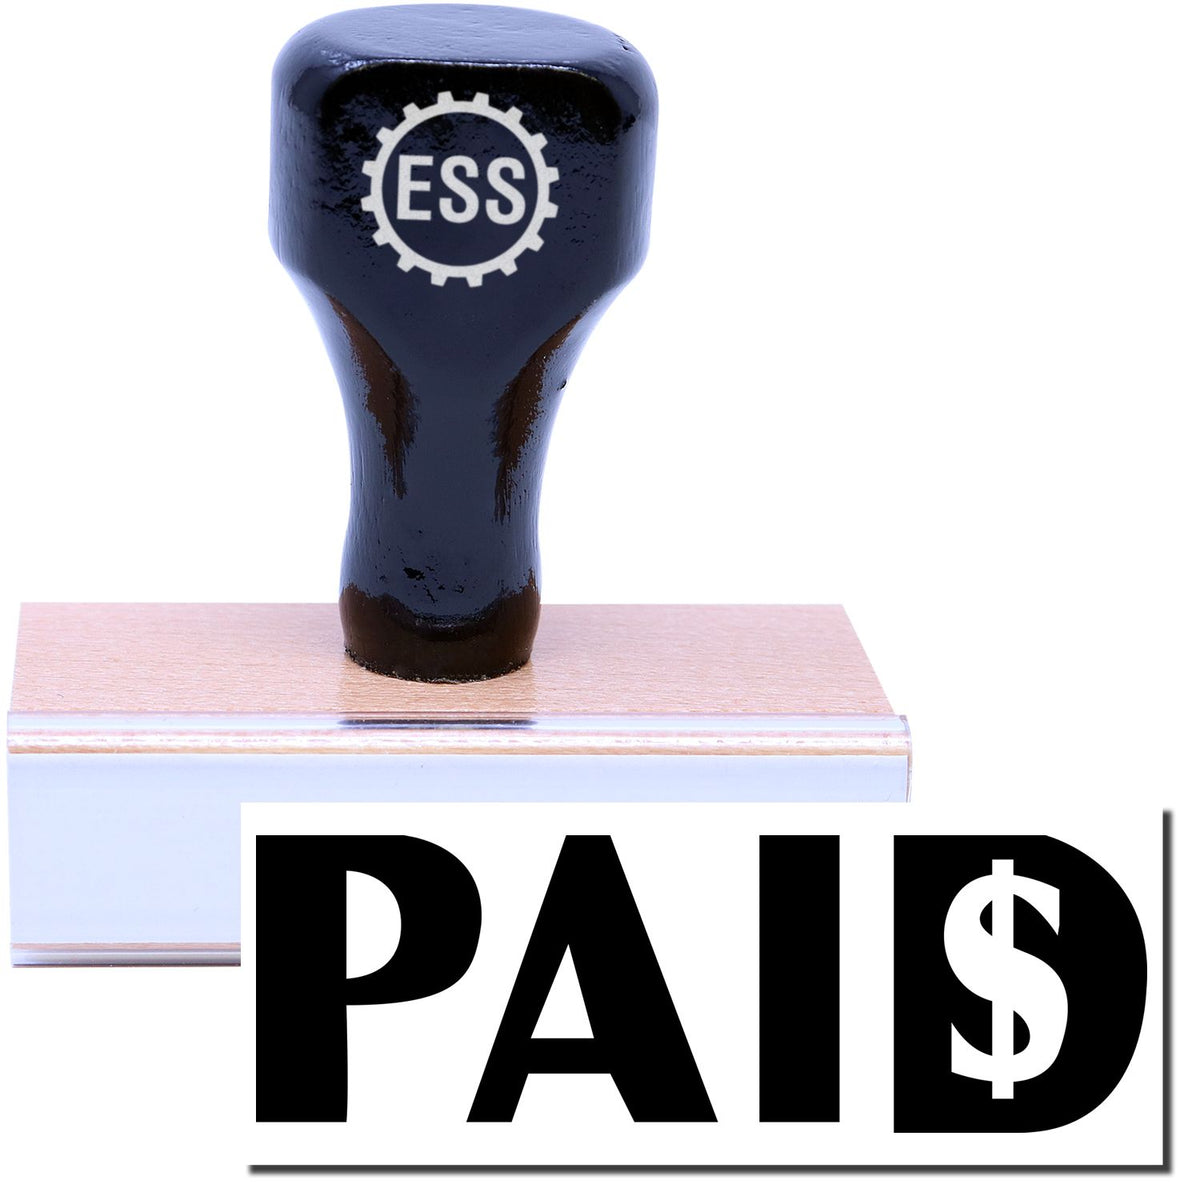 A stock office rubber stamp with a stamped image showing how the text &quot;PAID&quot; in a large bold font with a dollar sign ($) inside the alphabet &quot;D&quot; is displayed after stamping.